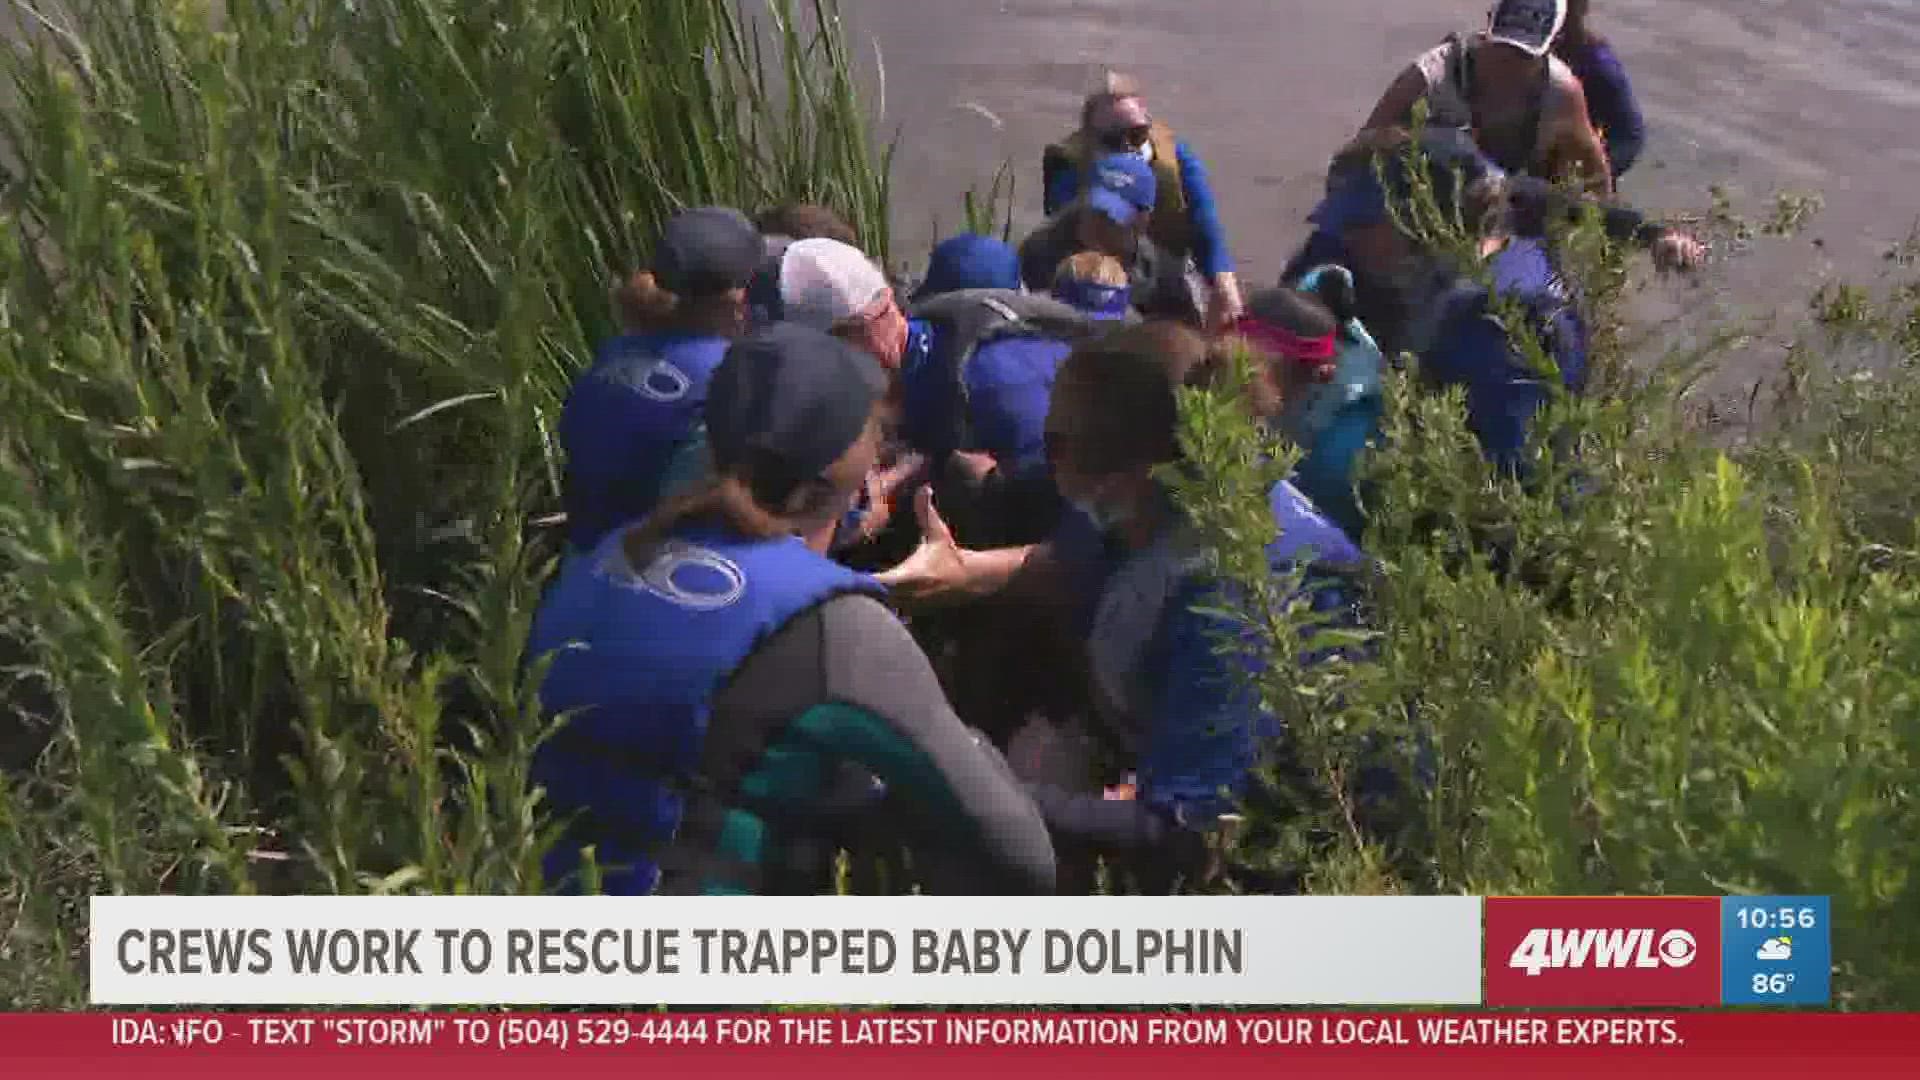 SeaWorld's John Peterson flew in to Slidell to help rescue the dolphin. He says the baby dolphin is doing great!